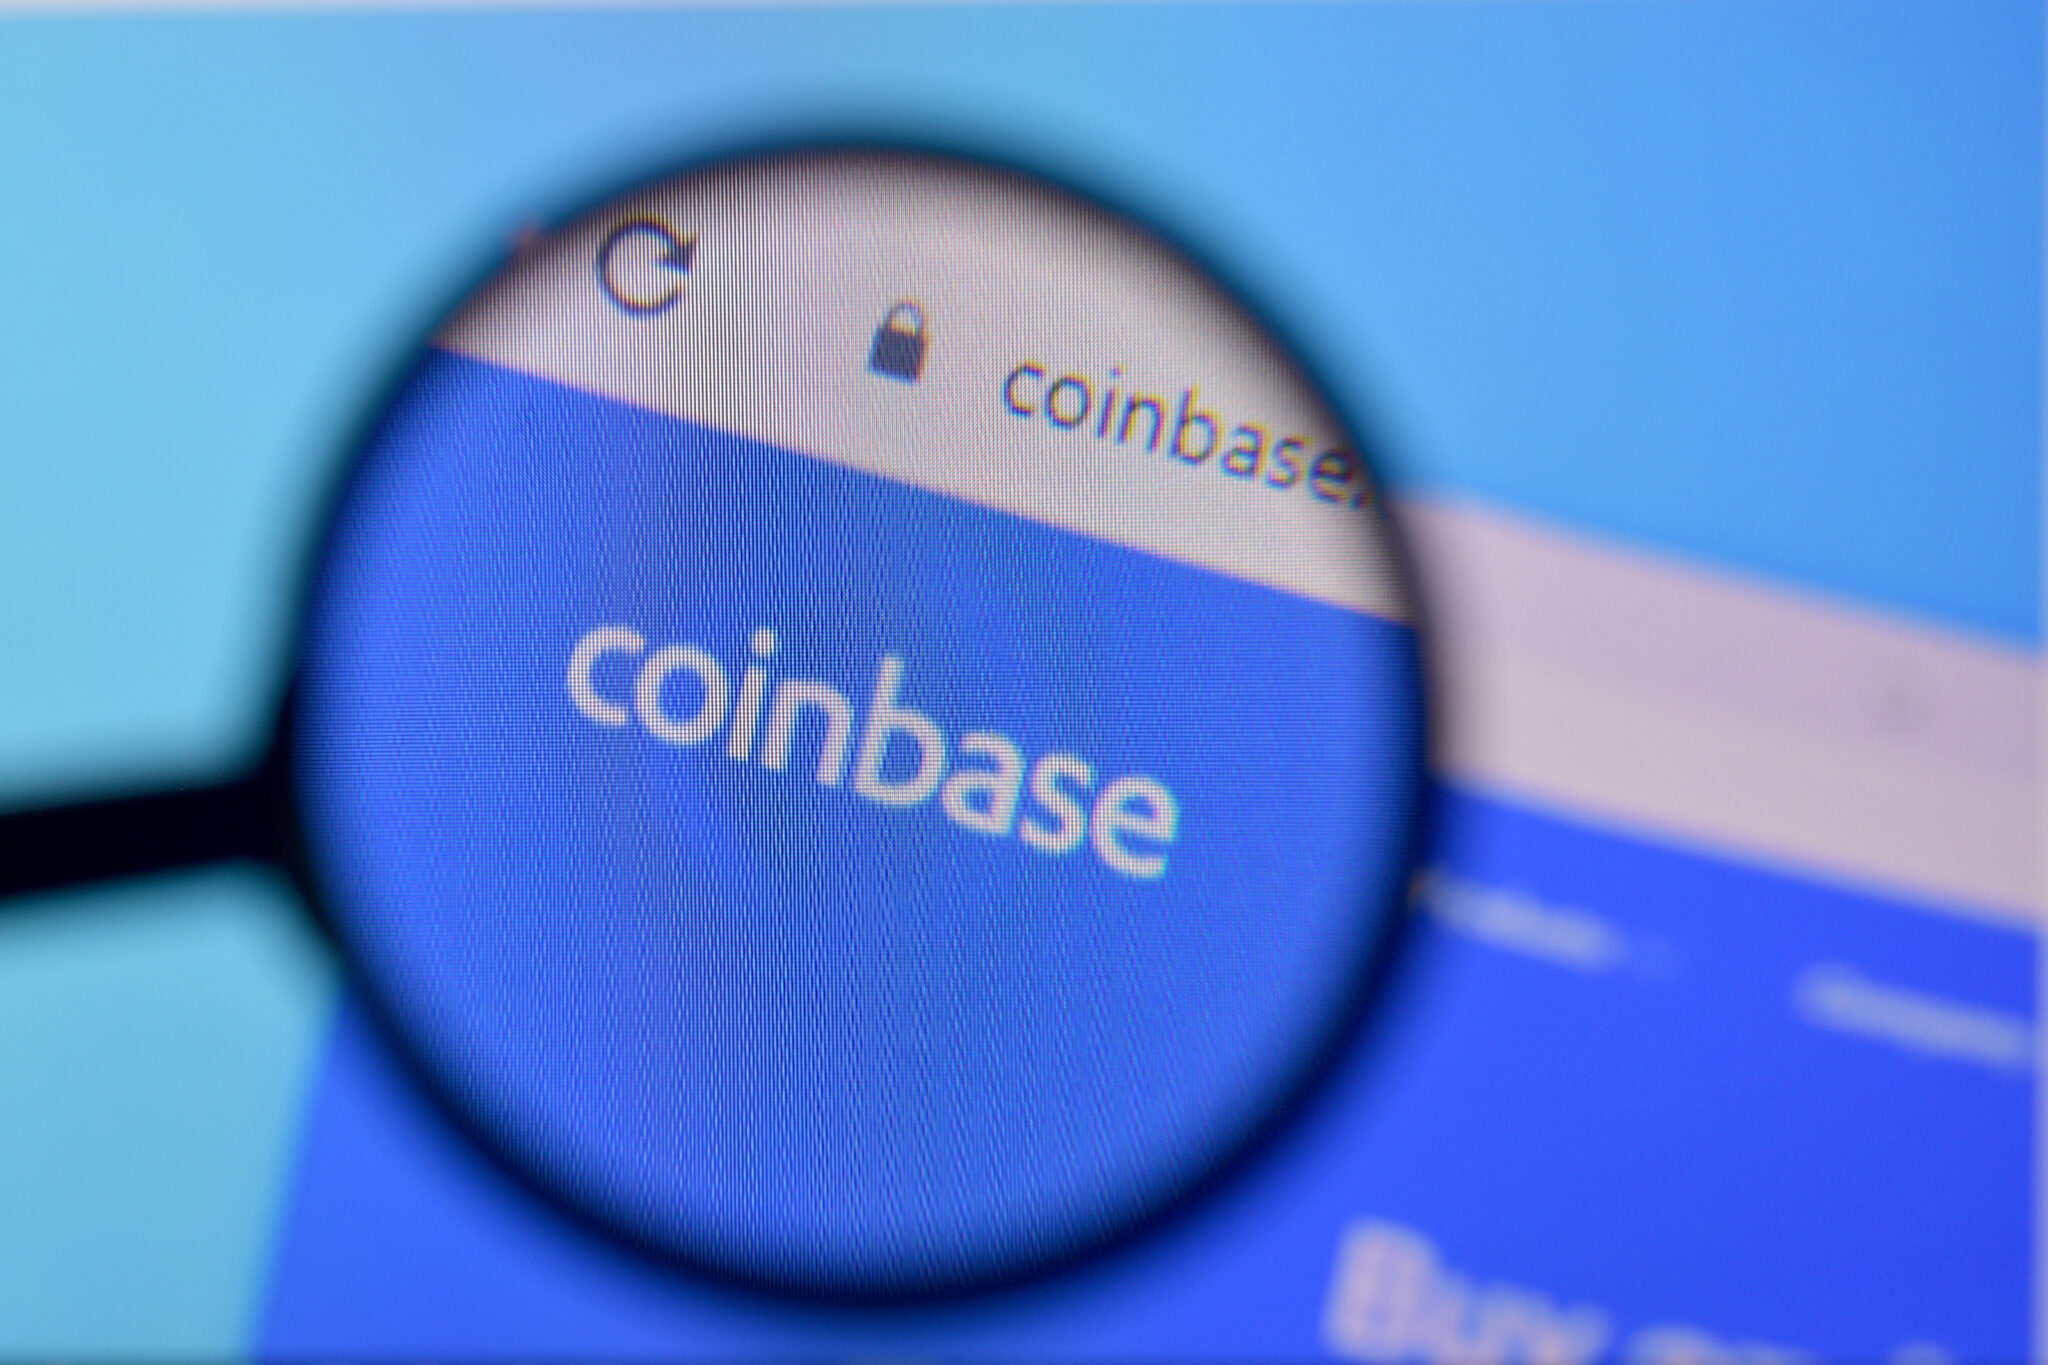 NY, USA - FEBRUARY 29, 2020: Homepage of coinbase website on the display of PC, url - coinbase.com.